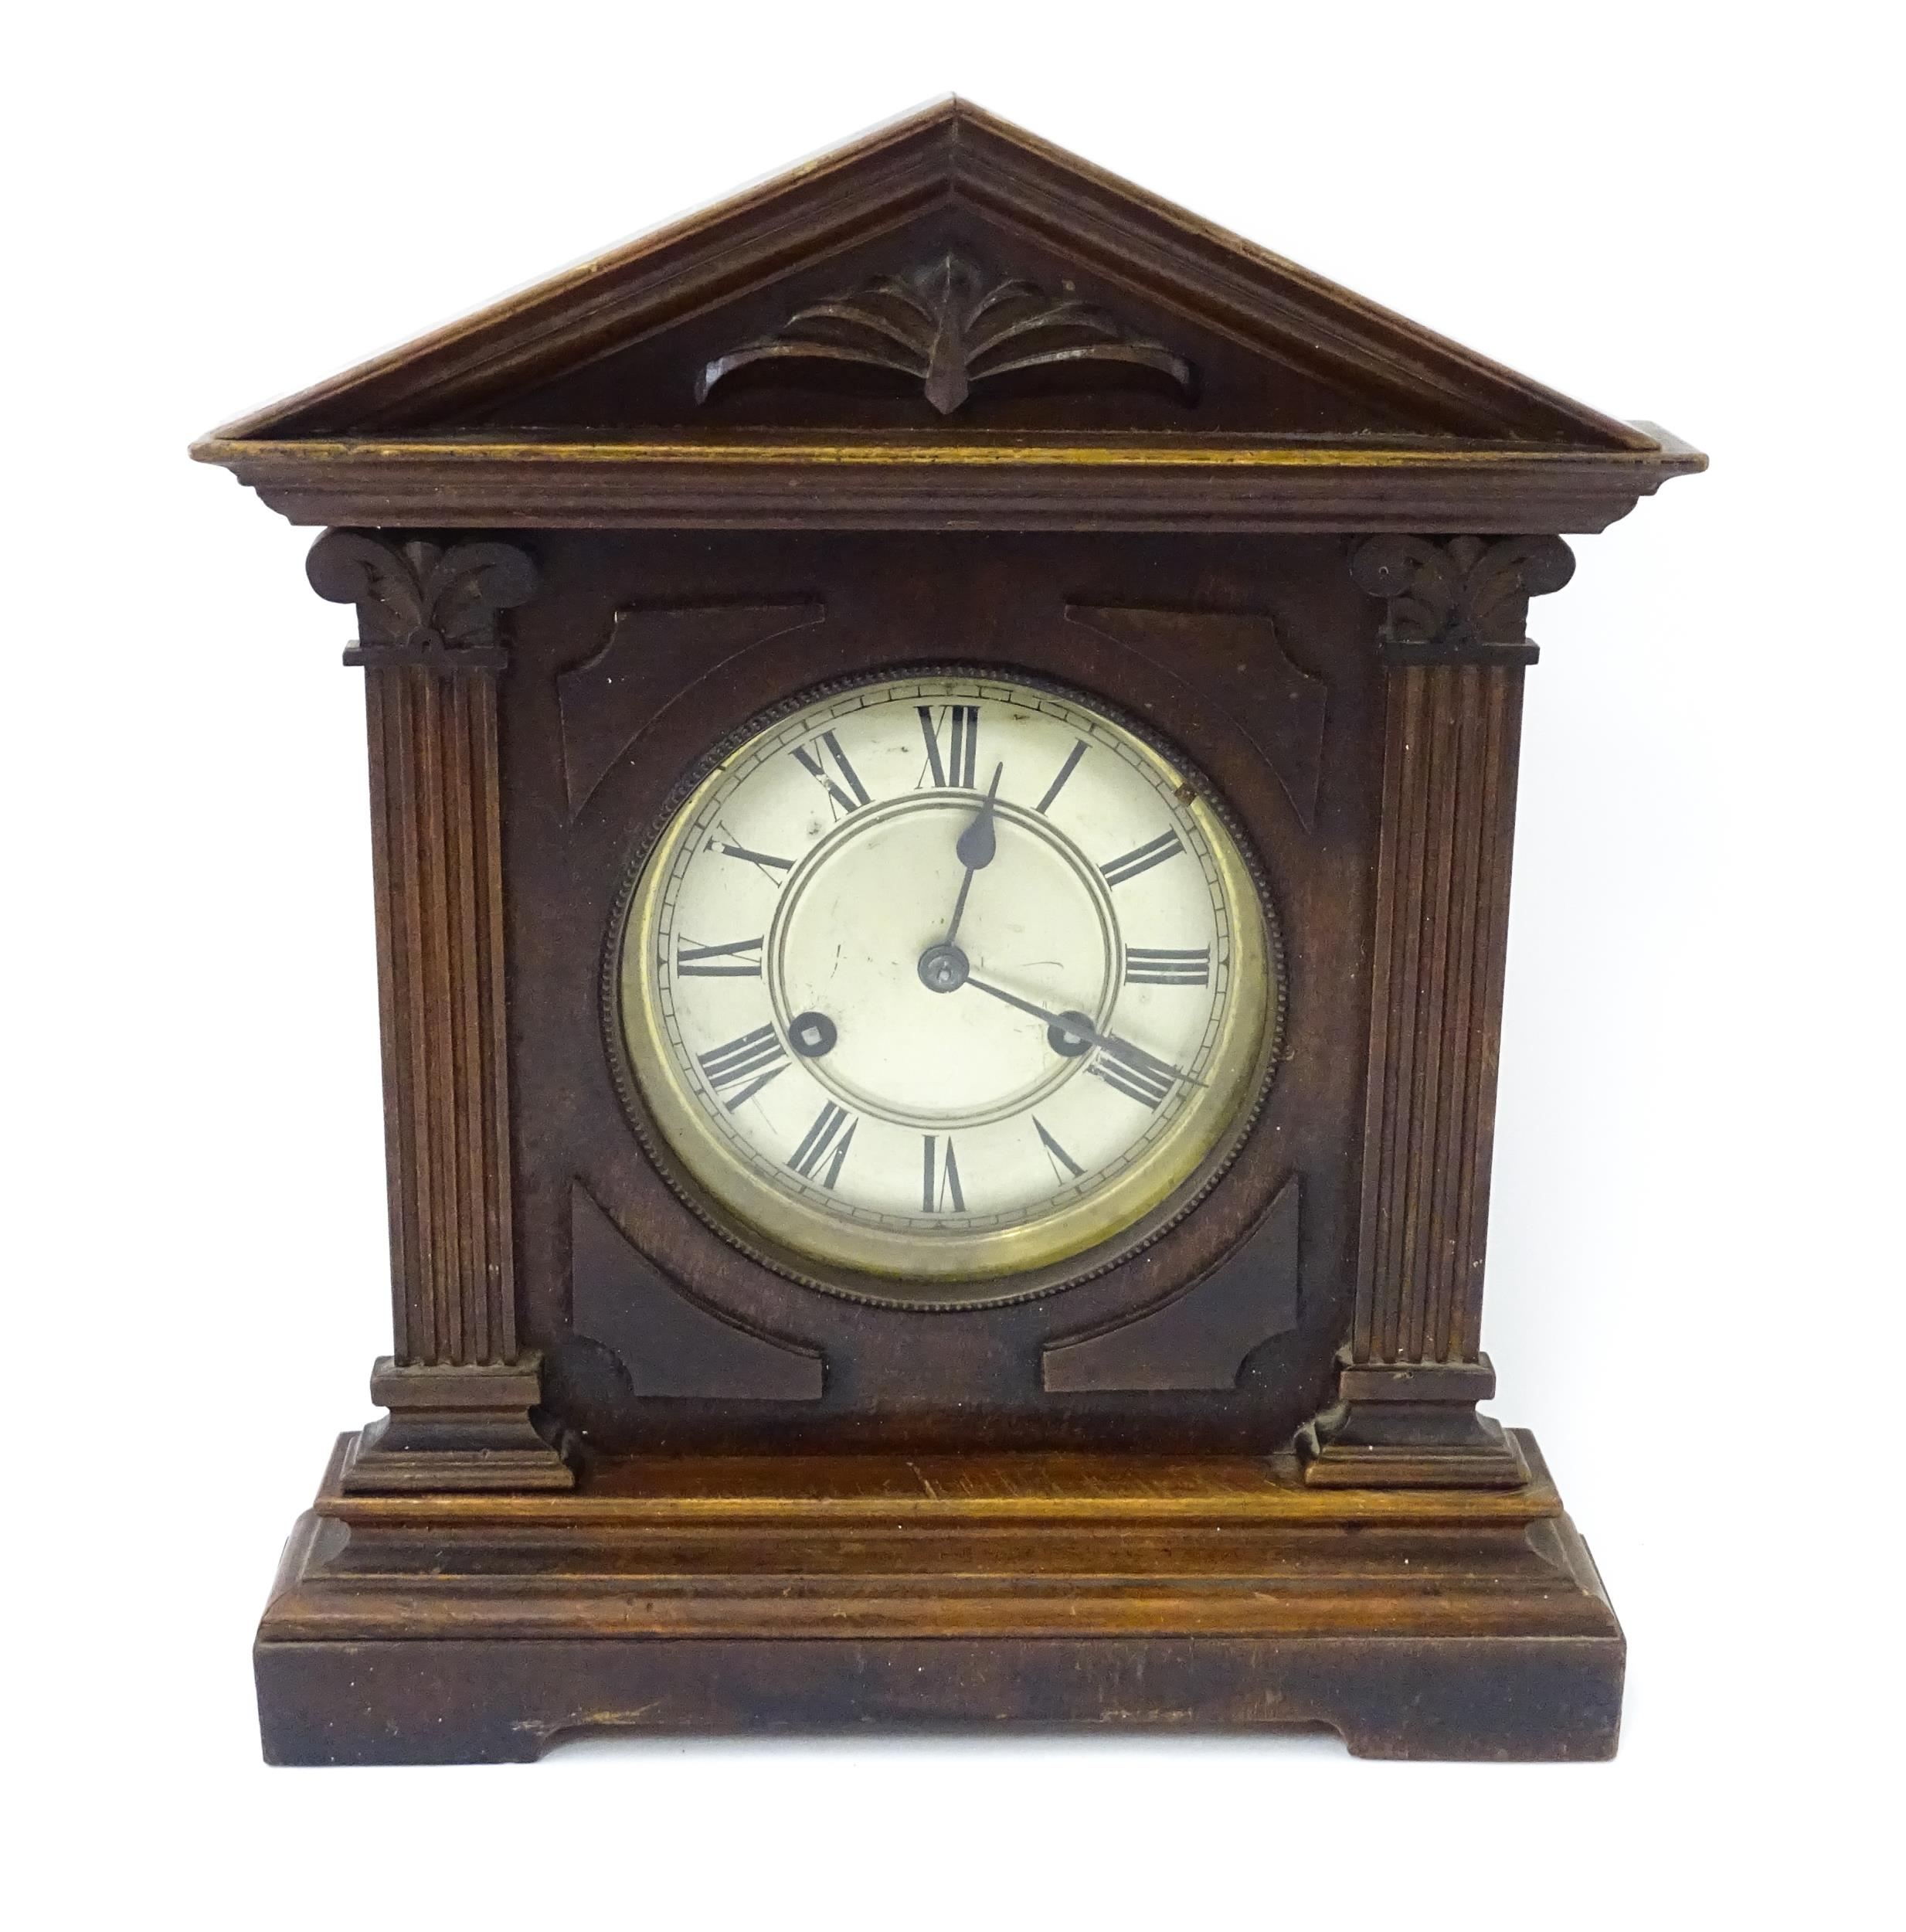 A late 19th/ early 20thC mahogany cased mantle clock by Philipp Haas & Sohne. The white enamel